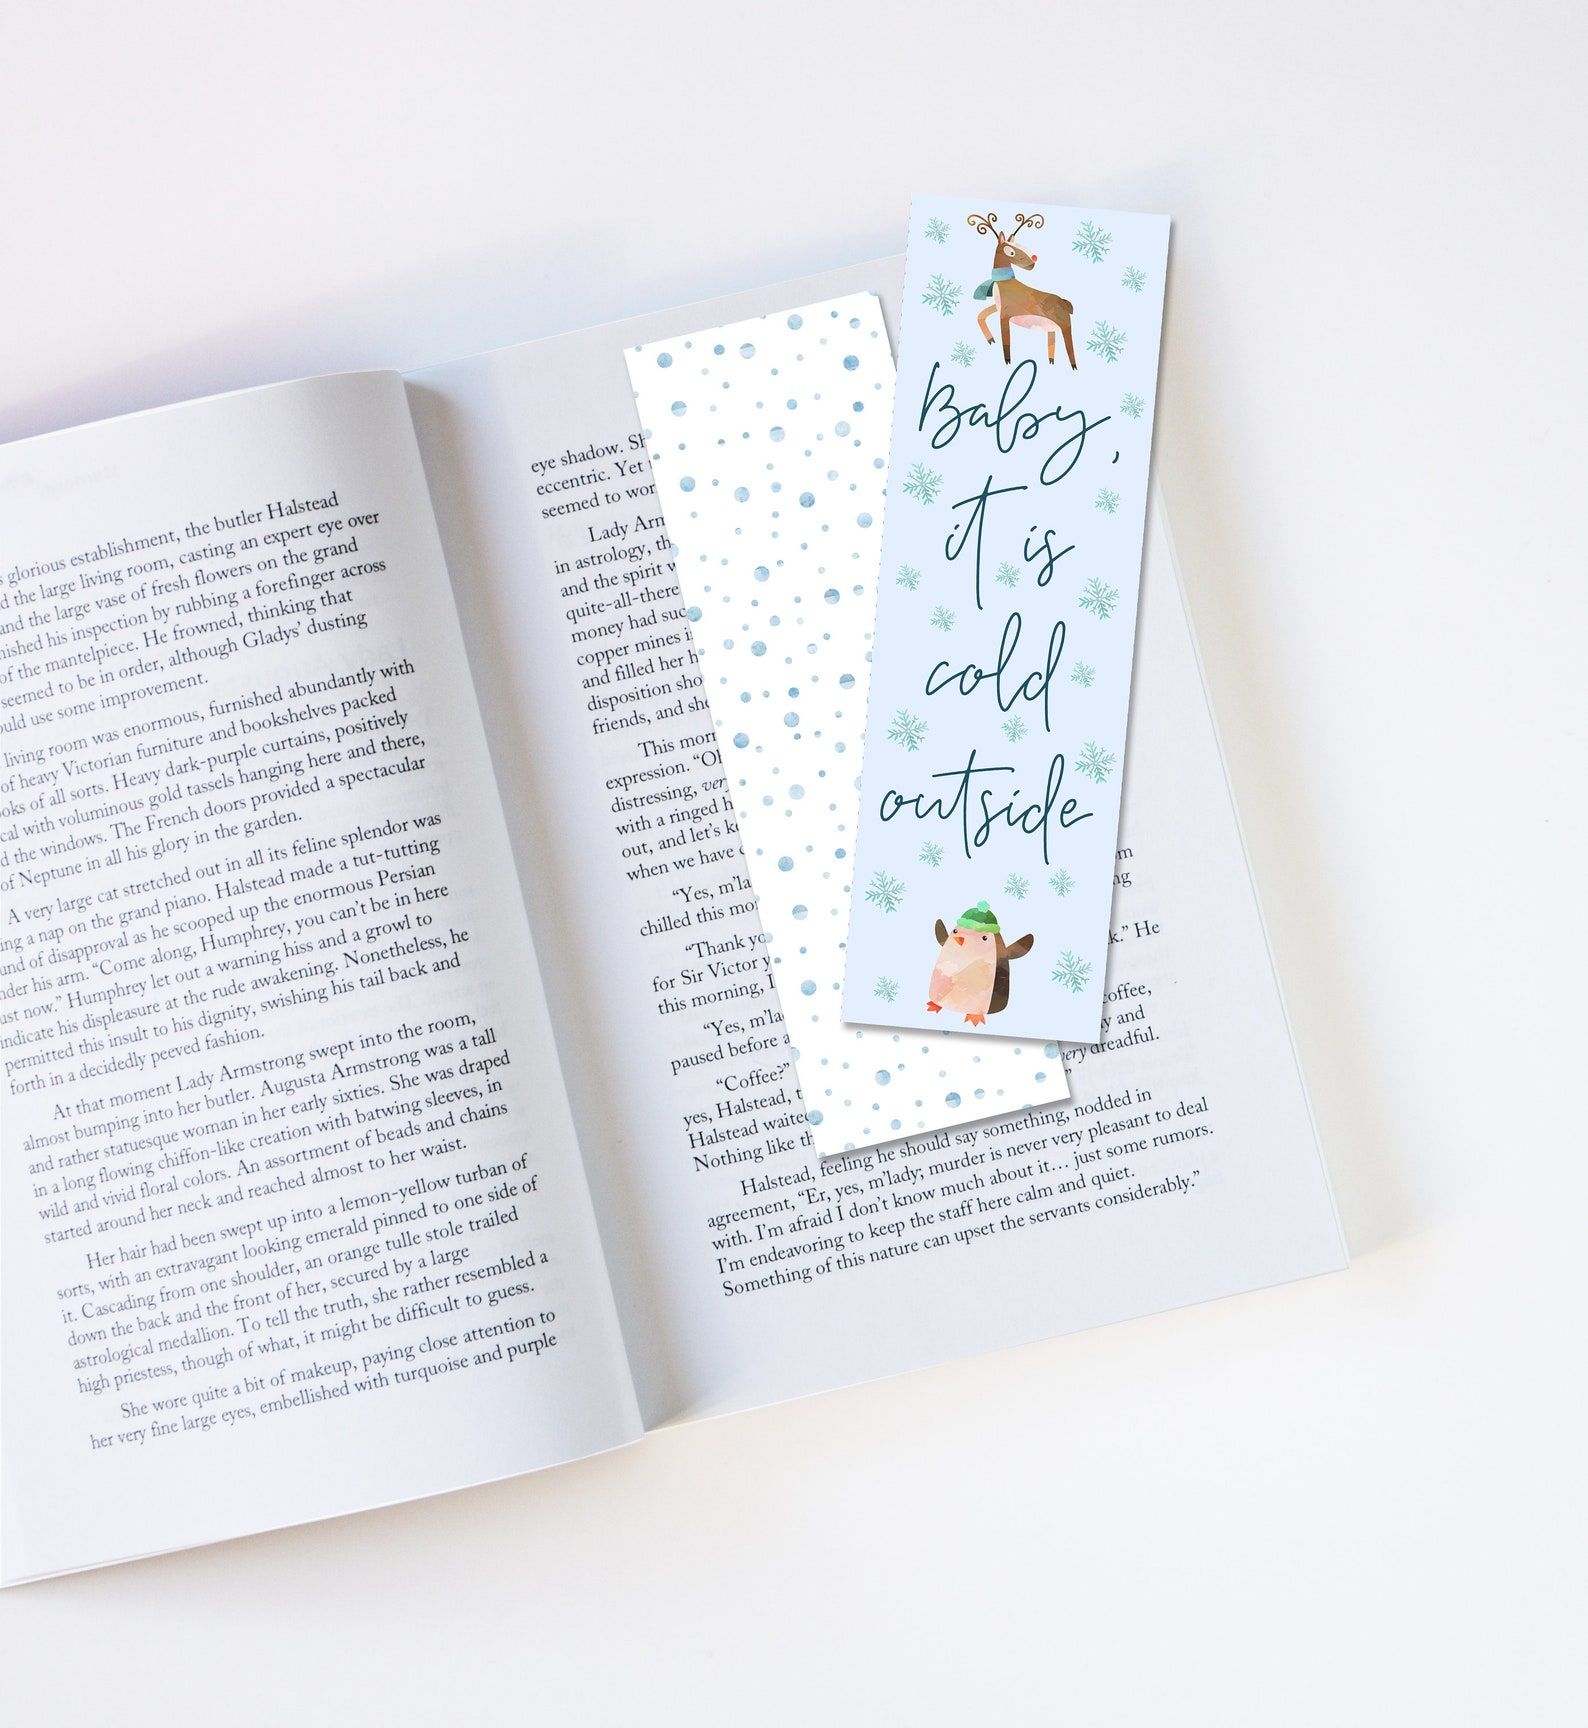 Image of the front and back of a bookmark on top of an open book. The back of the bookmark is white with blue snow. The front of the bookmark reads "Baby it's cold outside" in script, with a deer and penguin image. 